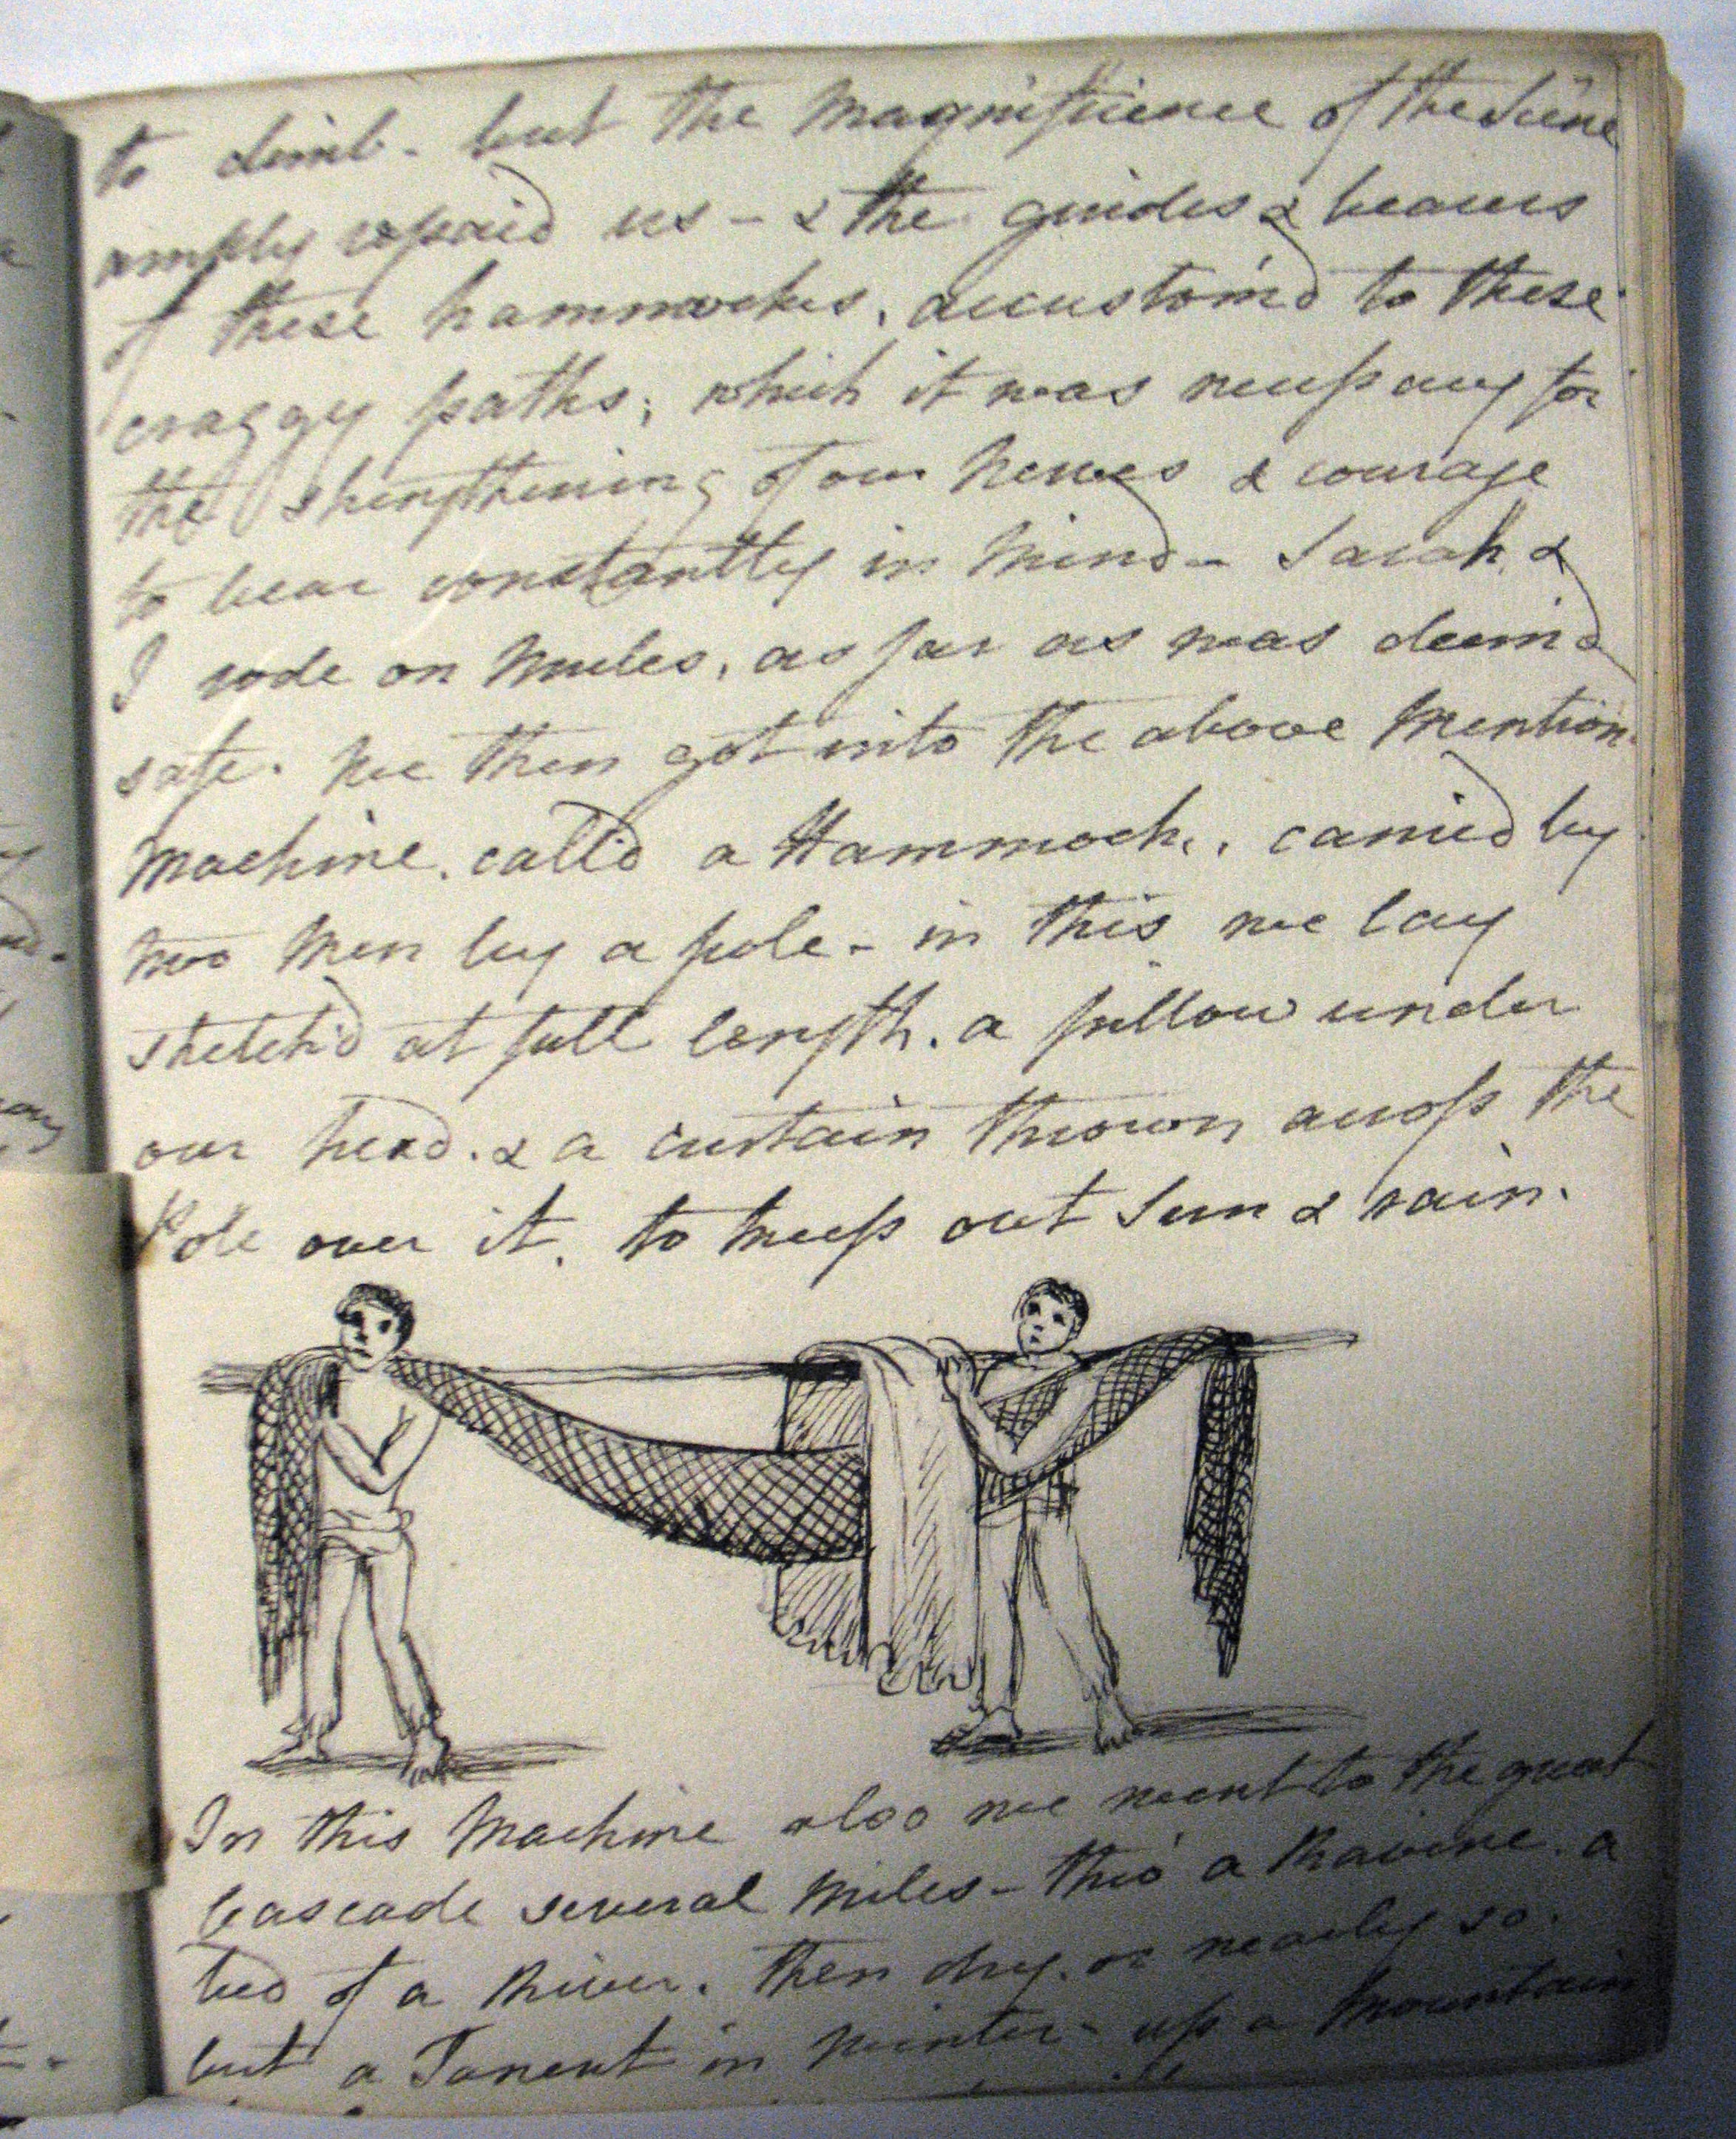 Lady Amherst Diary vol. 1, 1823-24.